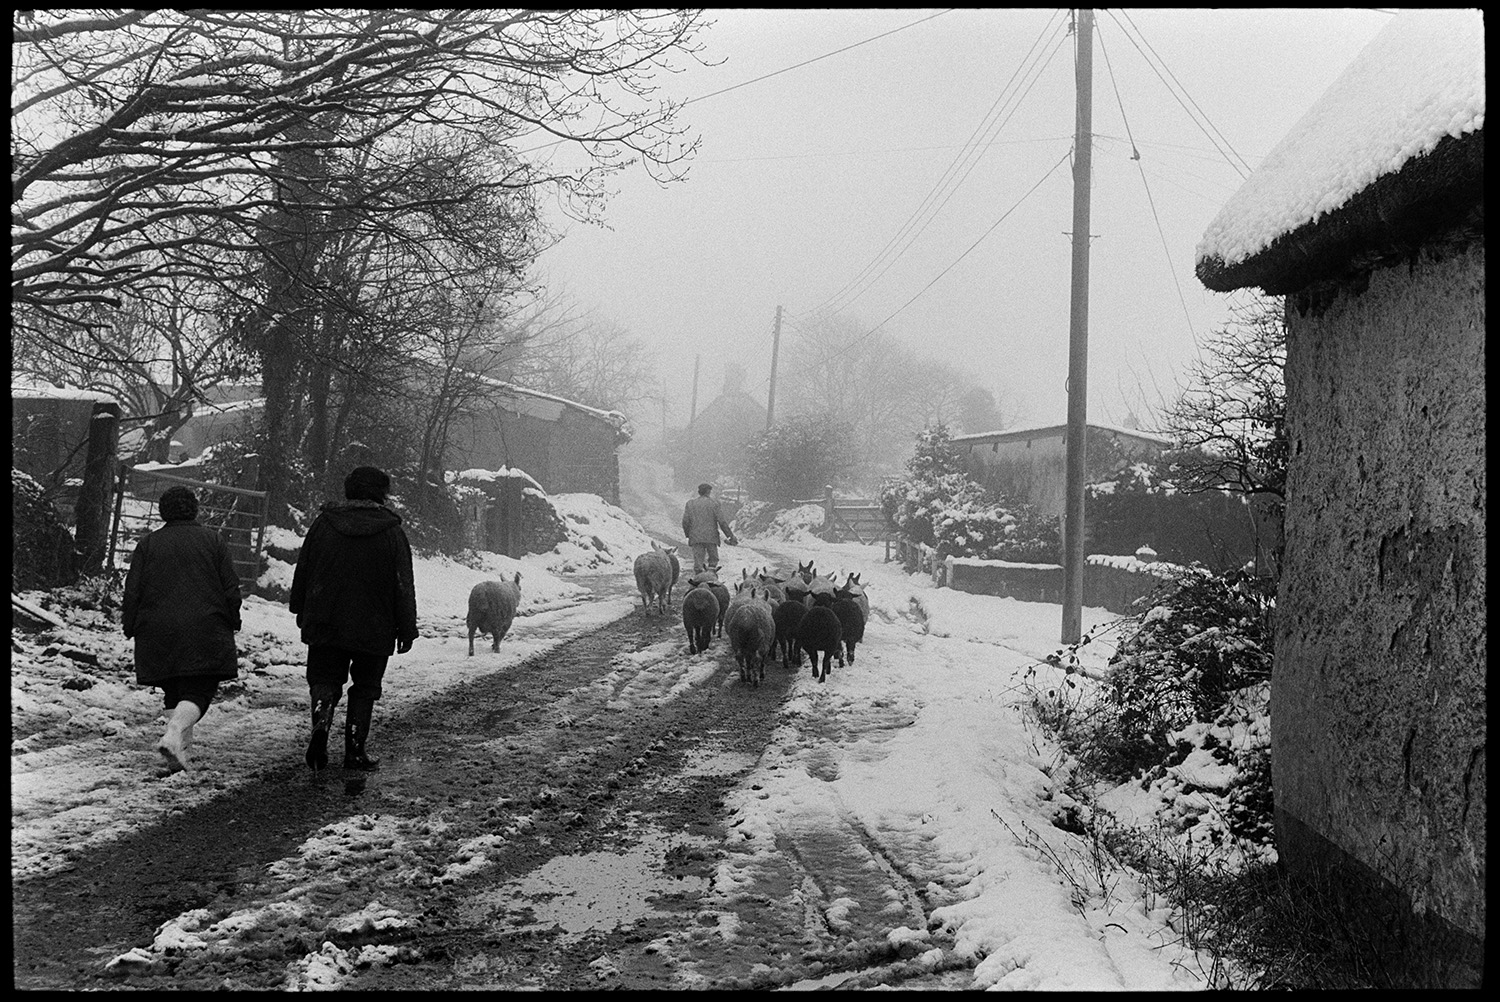 Snow, woman farmers and sheep going through village, through gate to fields under snow. 
[Members of the Jones family herding sheep along a snow covered road at Upcott, Dolton, past trees and buildings.]